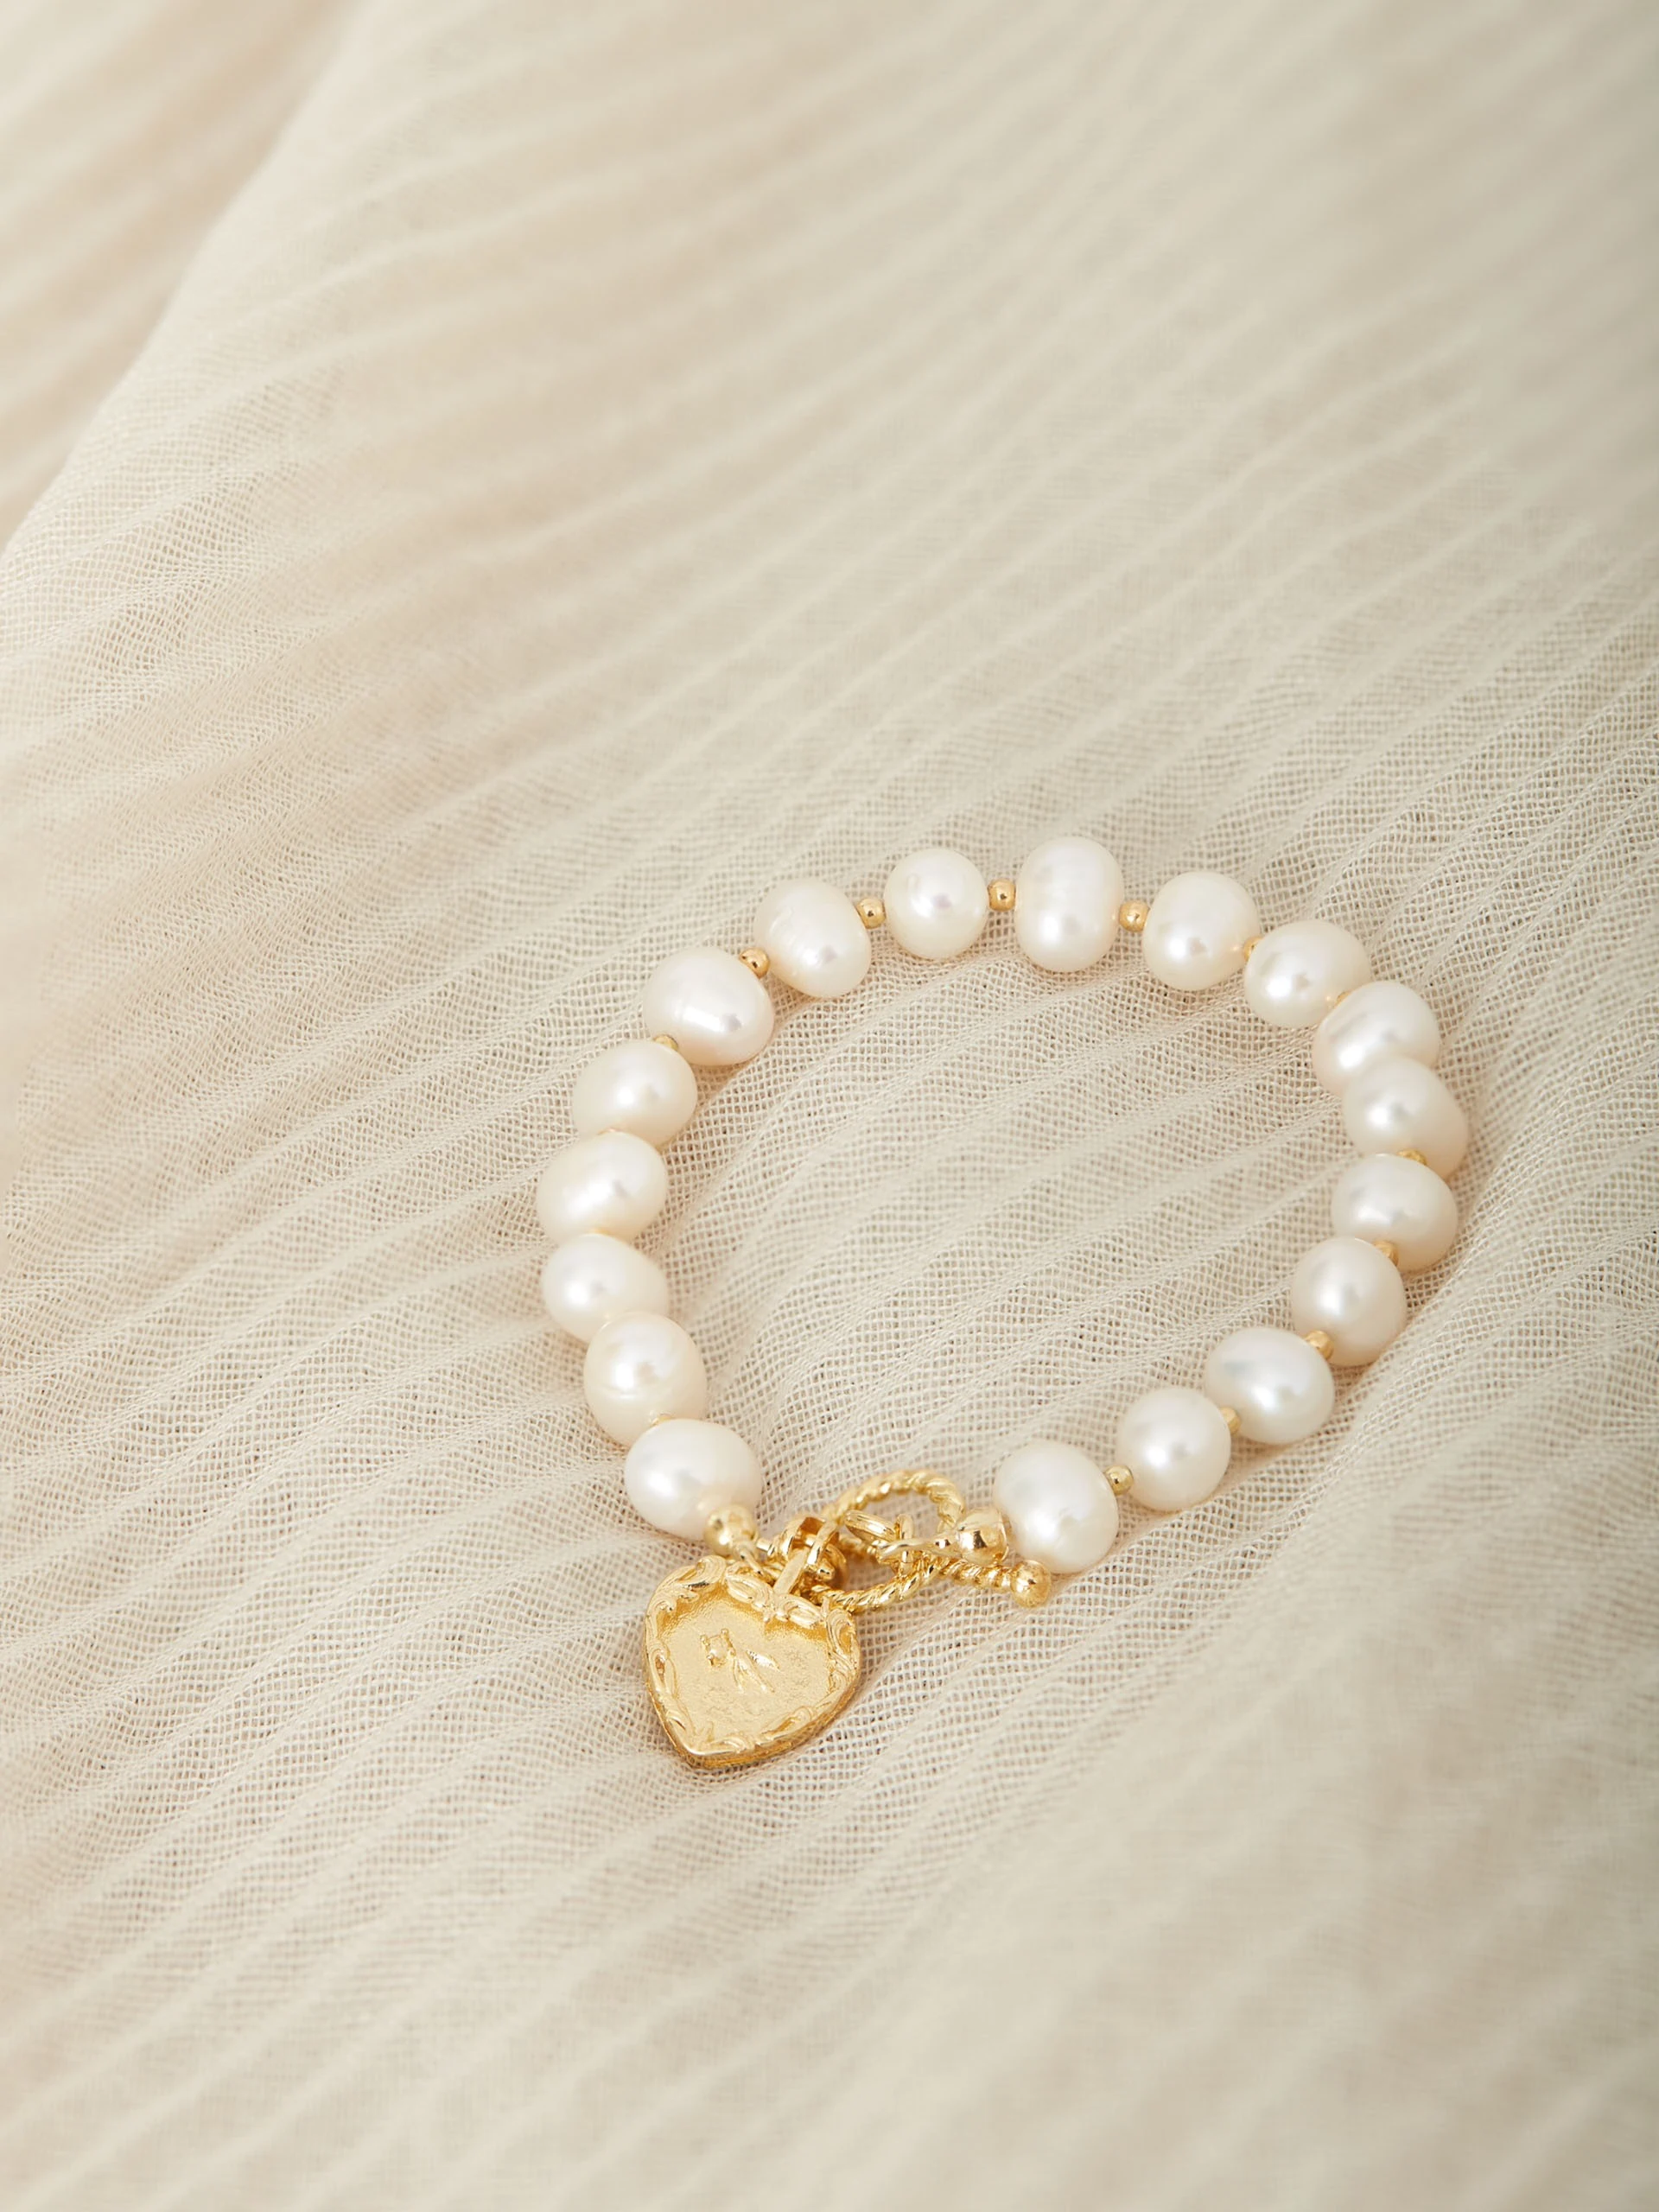 PEARL BRACELET WITH HEART-SHAPED CHARM